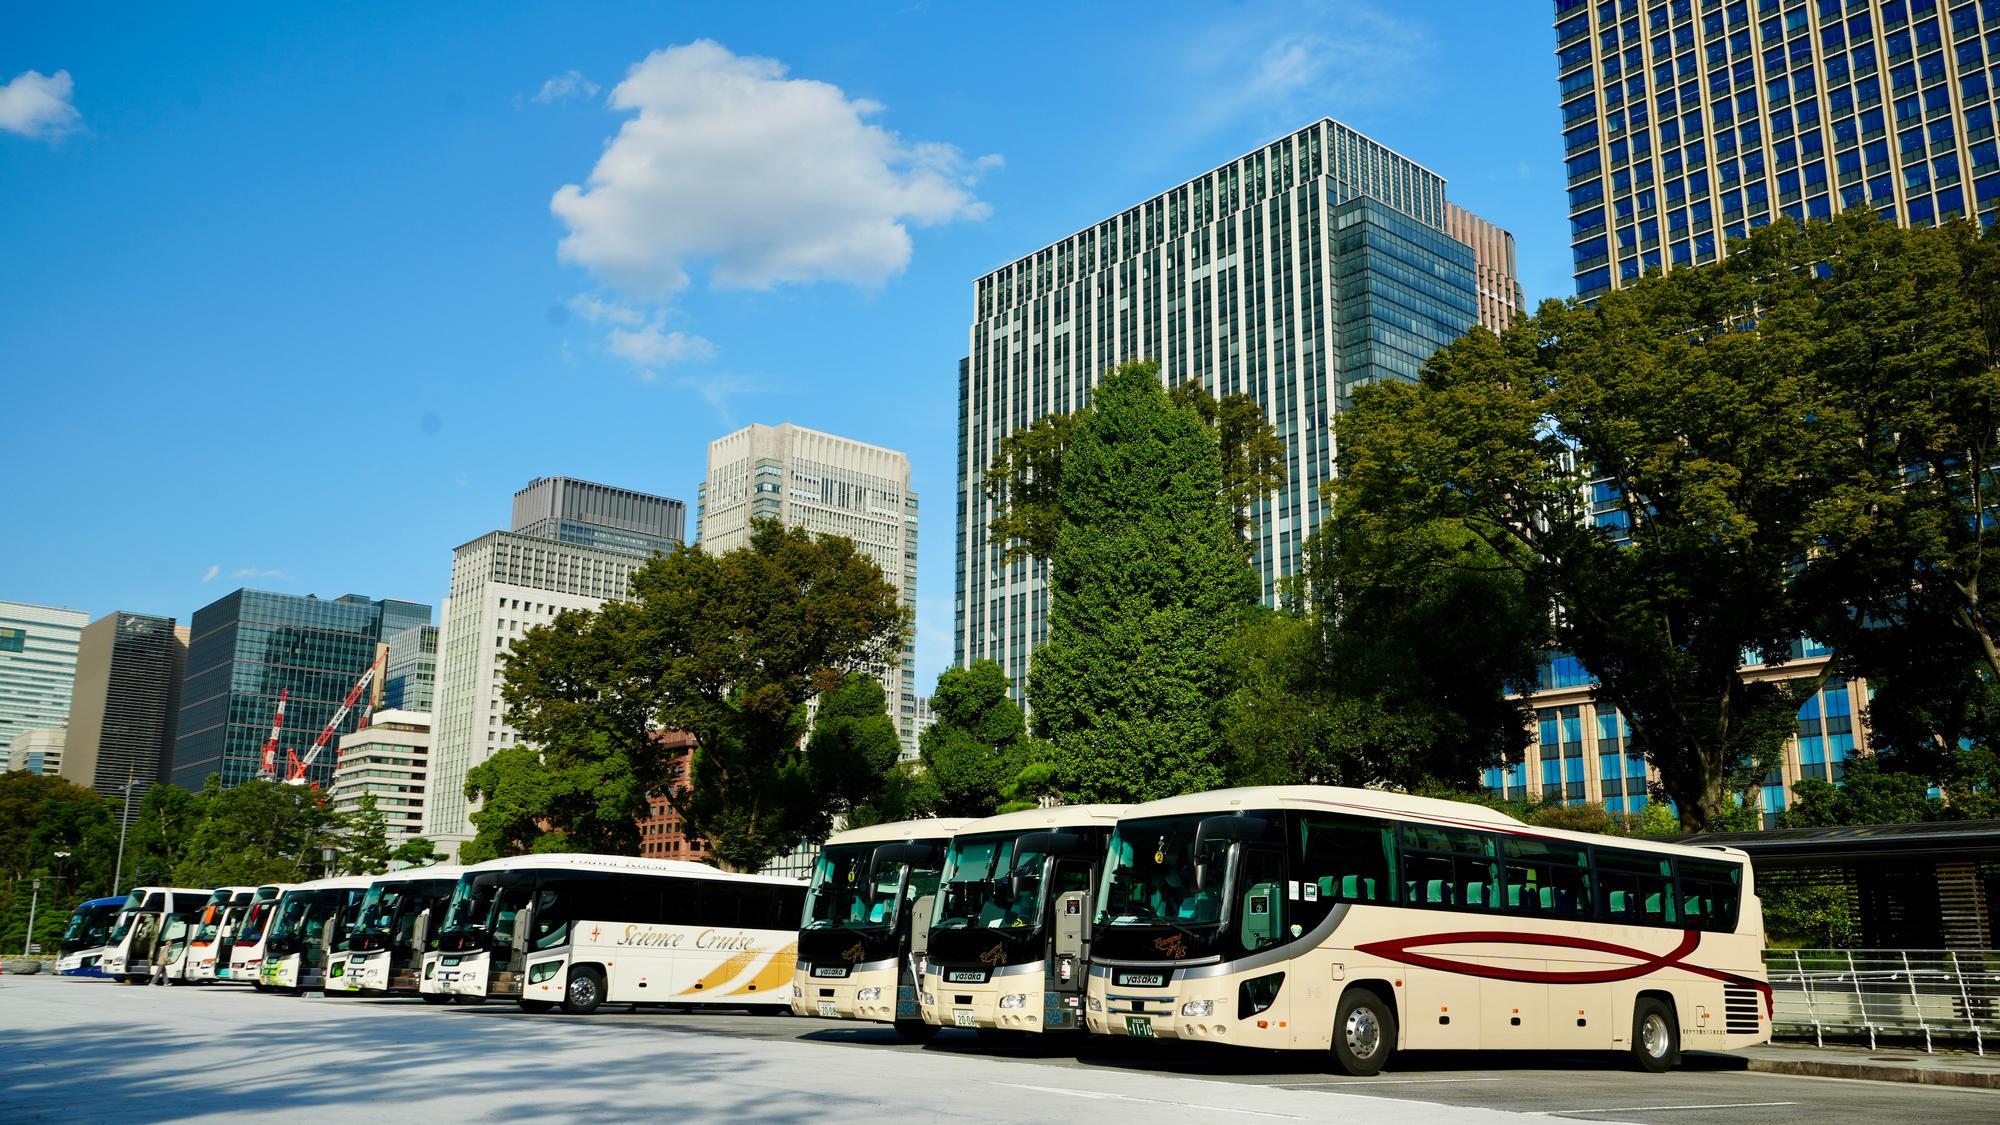 These buses were full of tourists visiting the Imperial Palace grounds